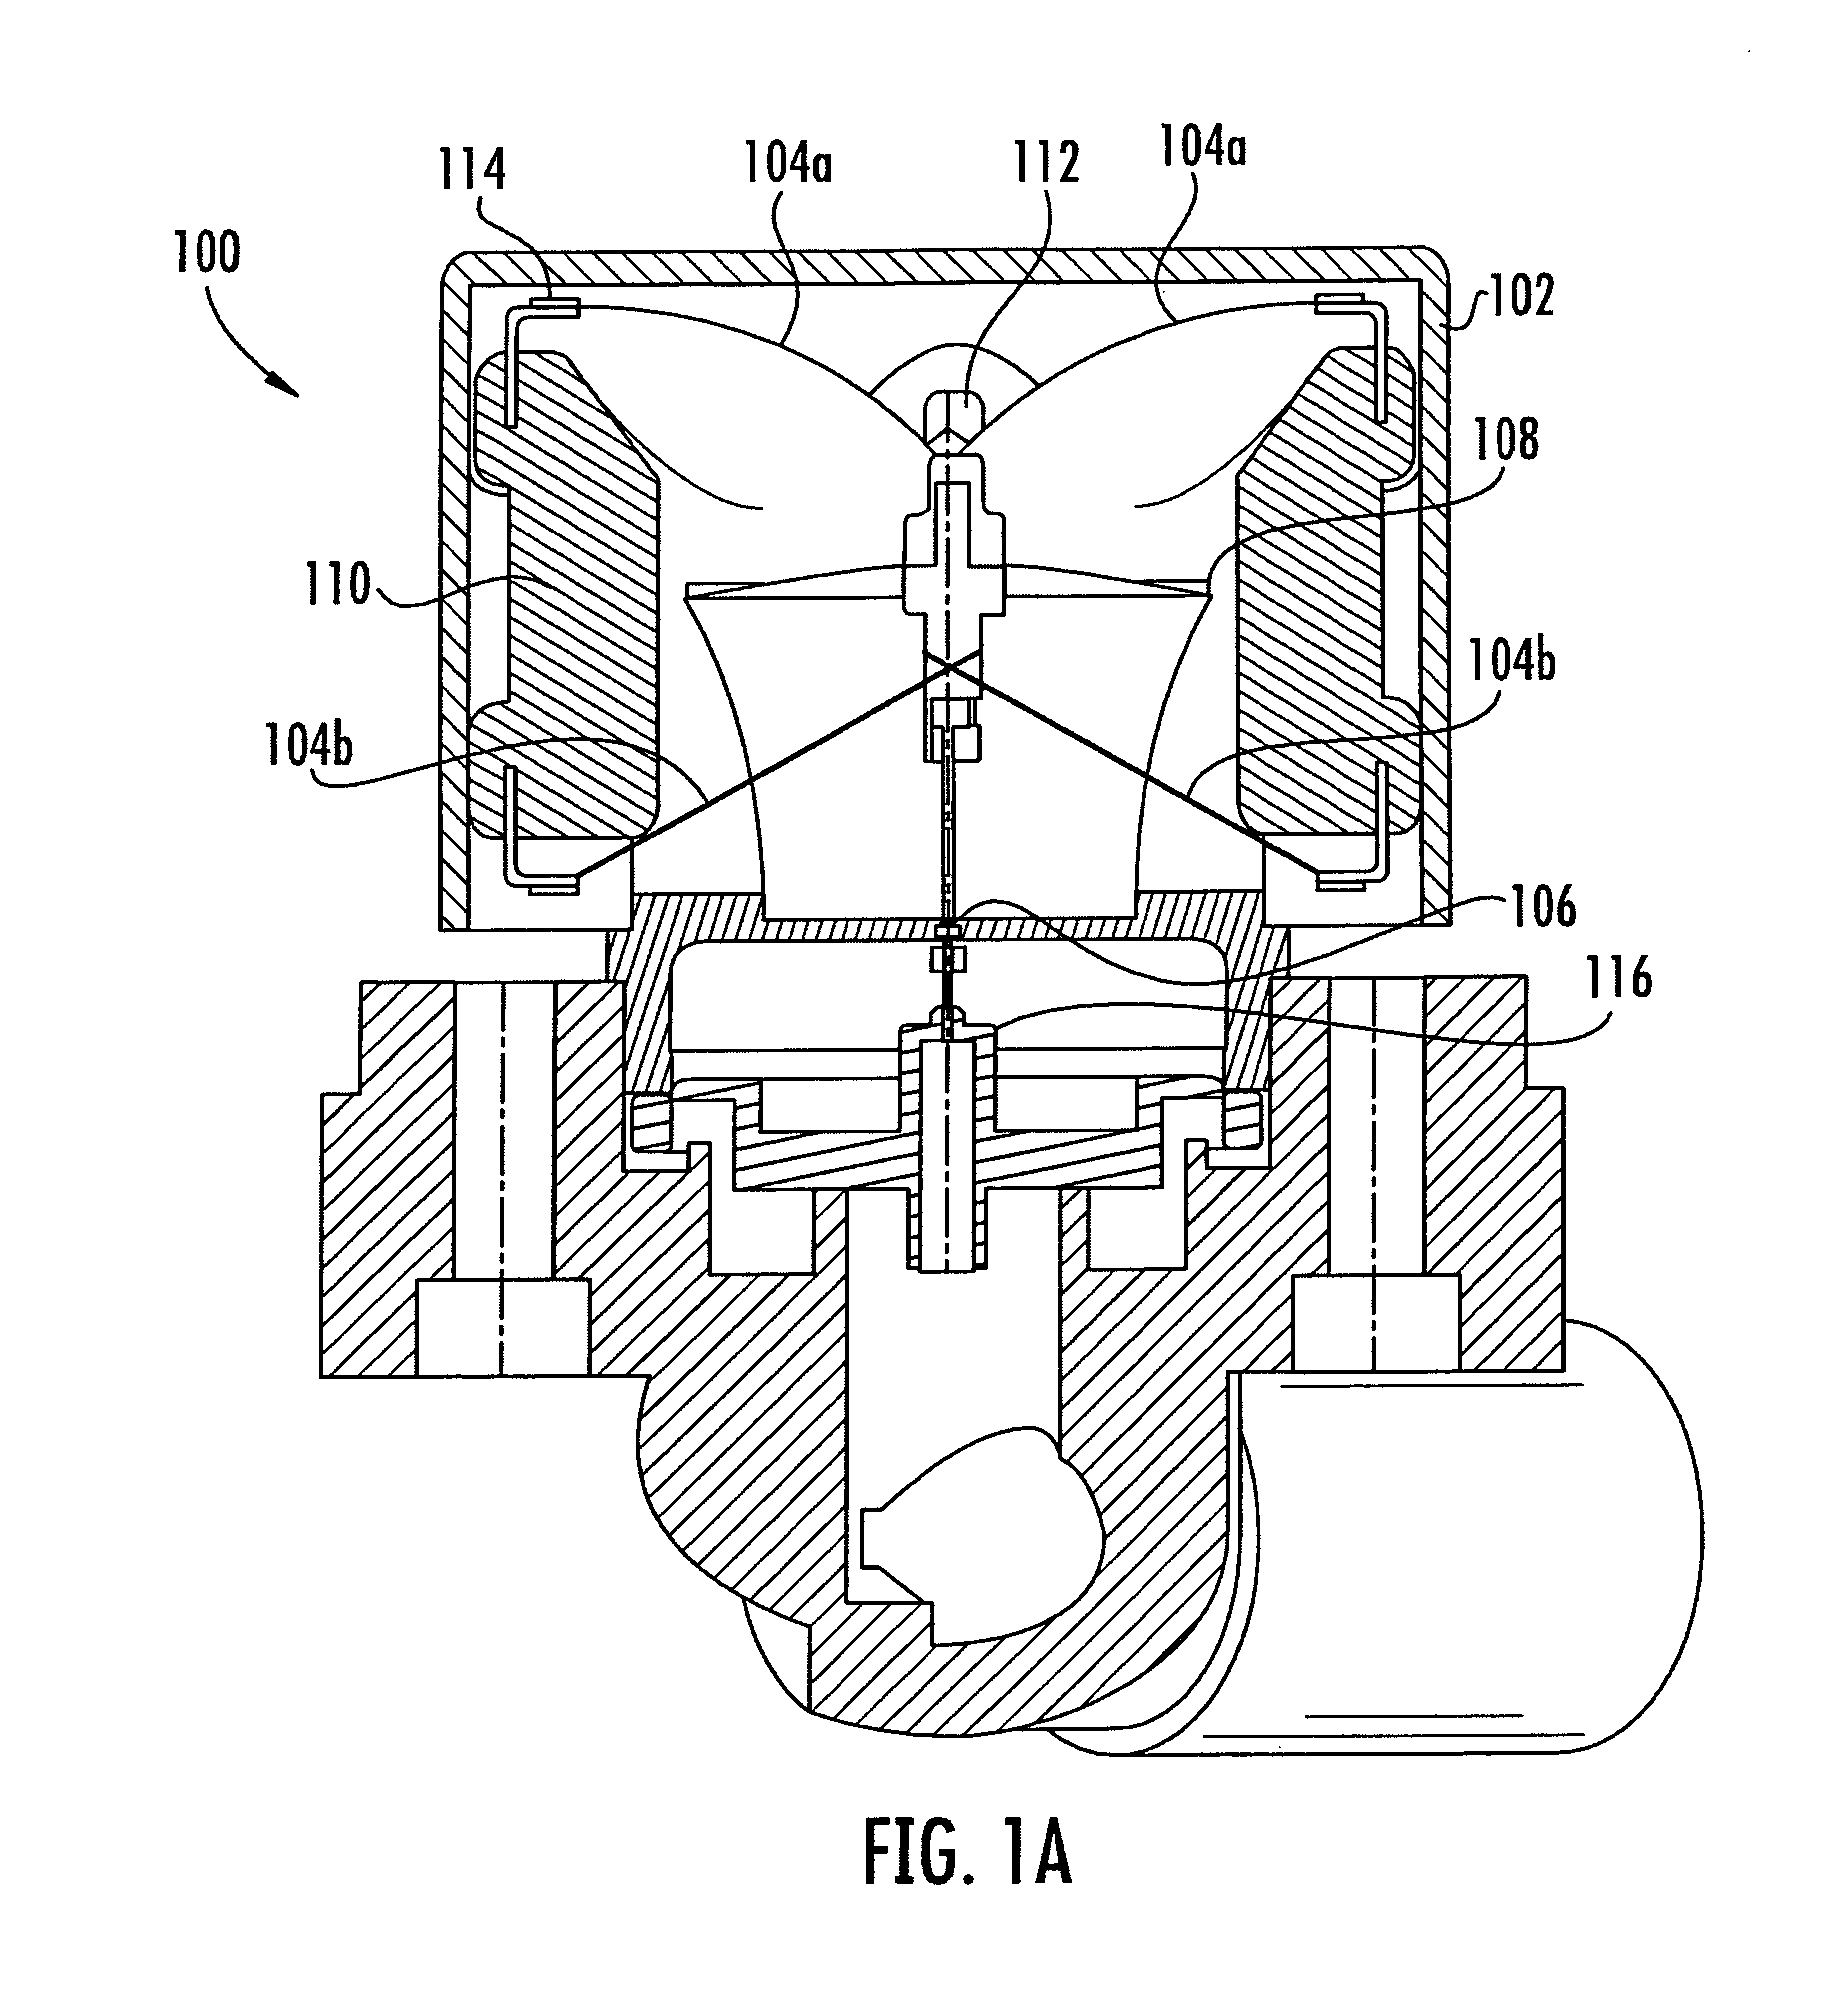 Multi-stable actuation apparatus and methods for making and using the same